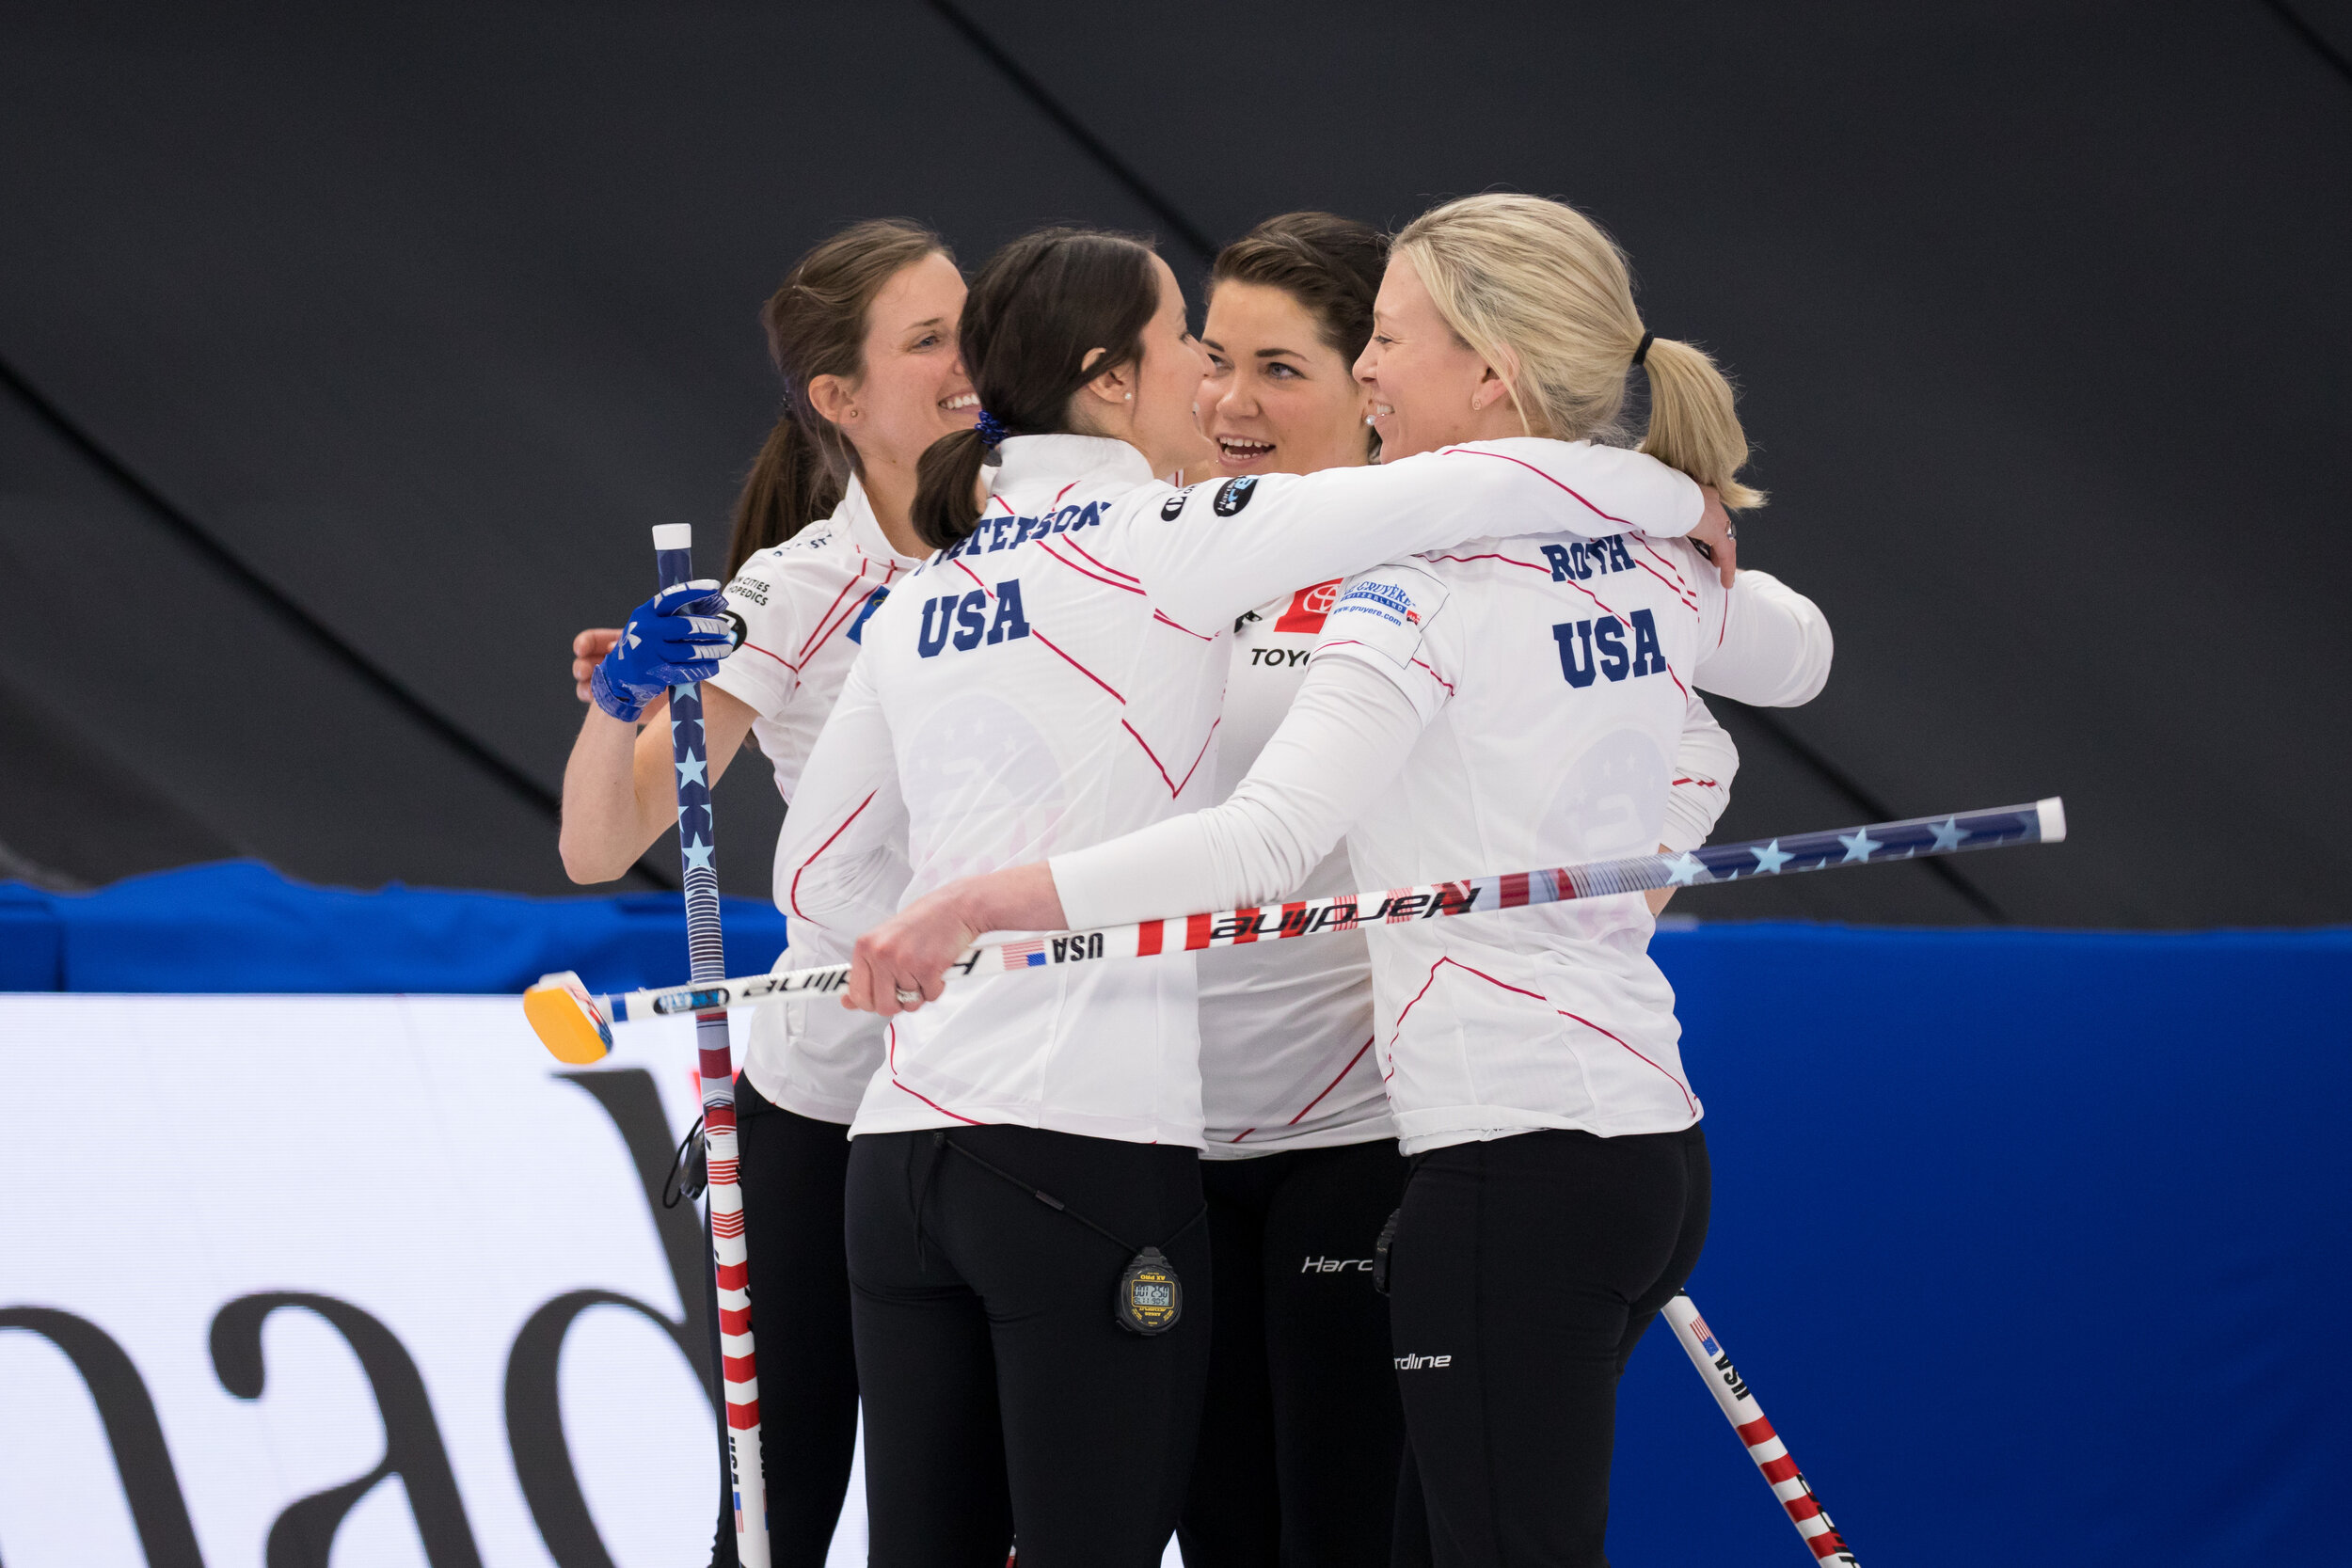 TEAM USA WINS FIRST EVER BRONZE MEDAL AT WORLD WOMENS CURLING CHAMPIONSHIP — USA CURLING